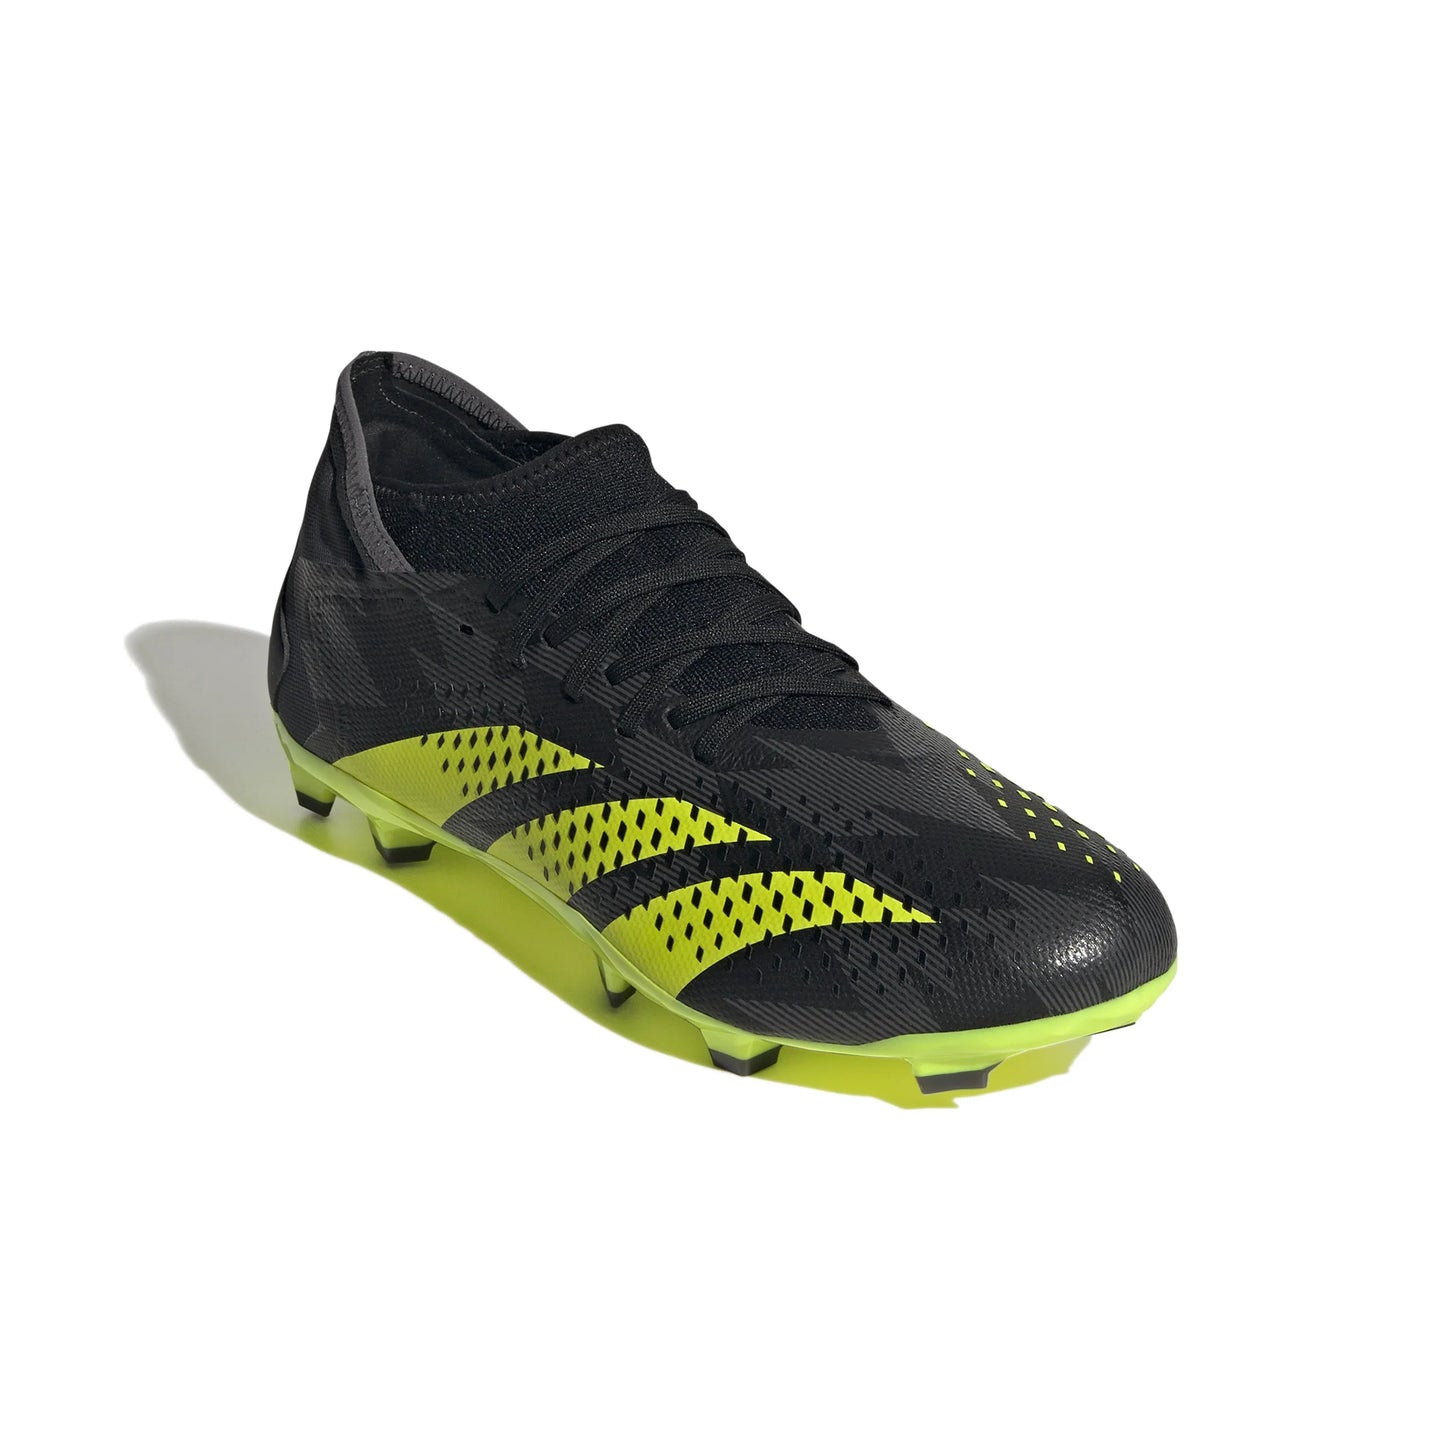 Adidas Predator Accuracy Injection.3 FG Soccer Cleats